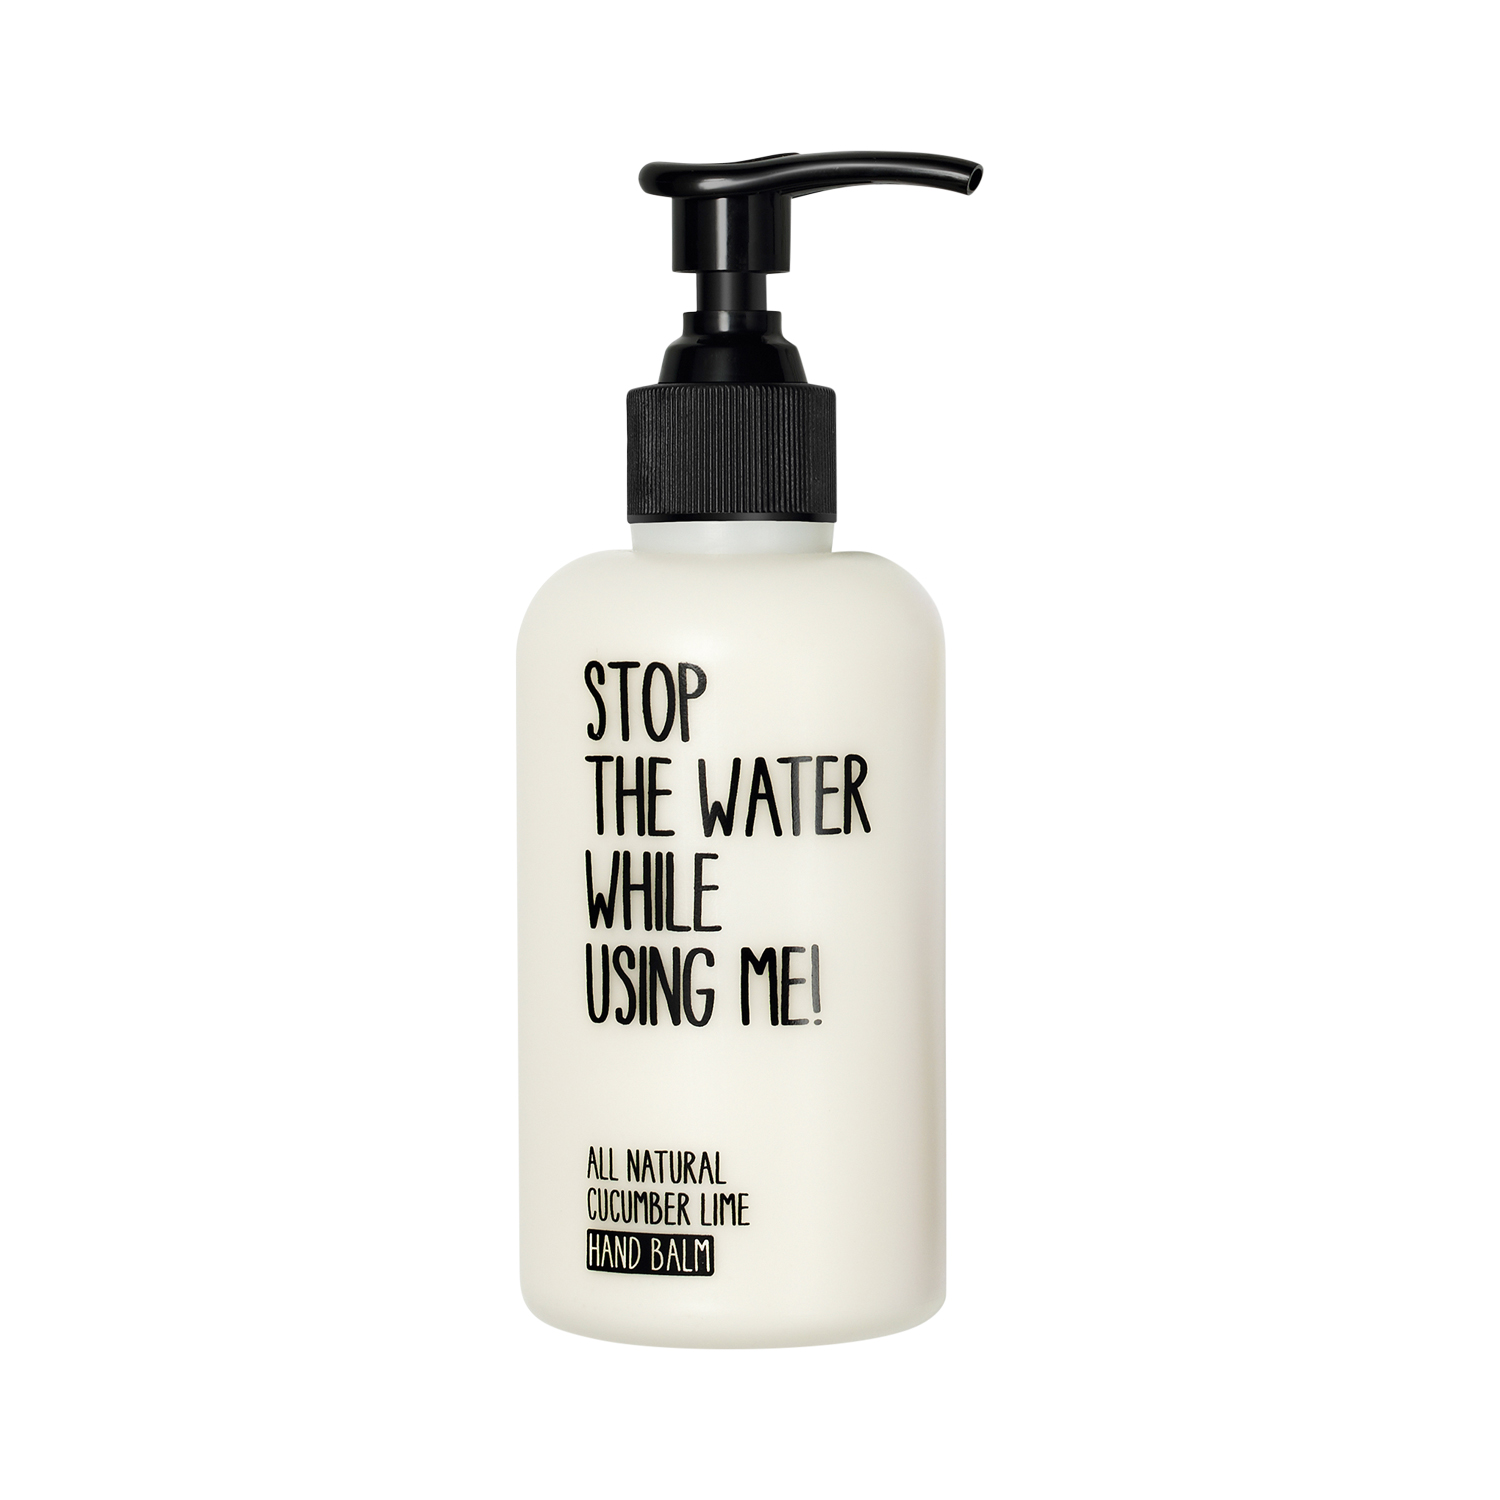 Stop The Water While Using Me! - All Natural Cucumber Lime Hand Balm - Handcreme